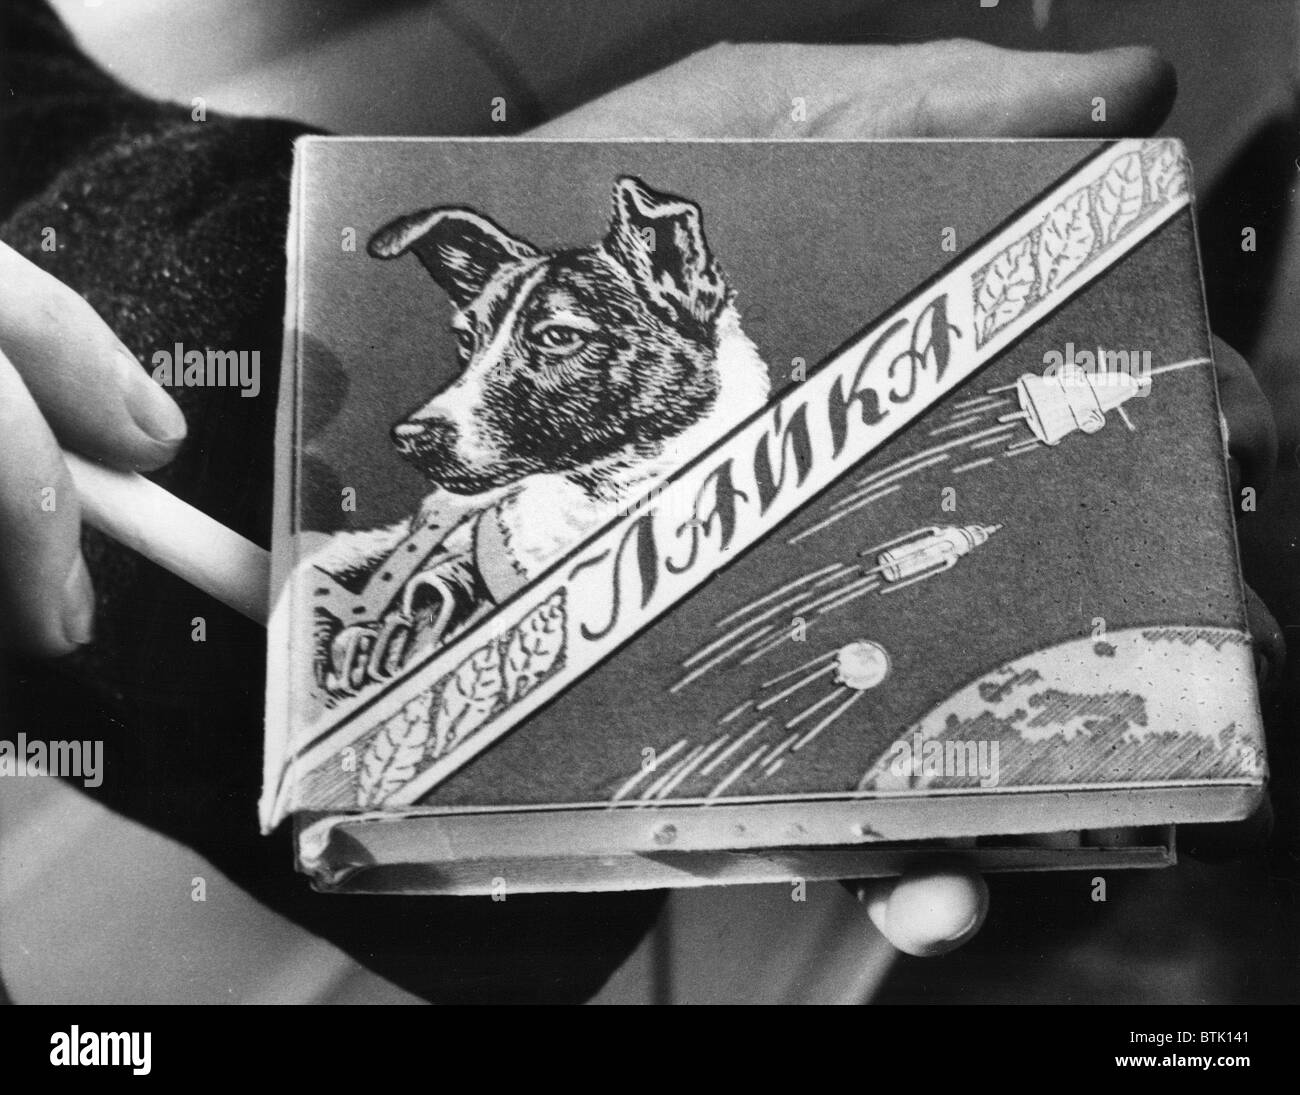 Laika the Russian space dog, first creature to orbit the earth has a brand  of cigarettes named for him, 1960 Stock Photo - Alamy